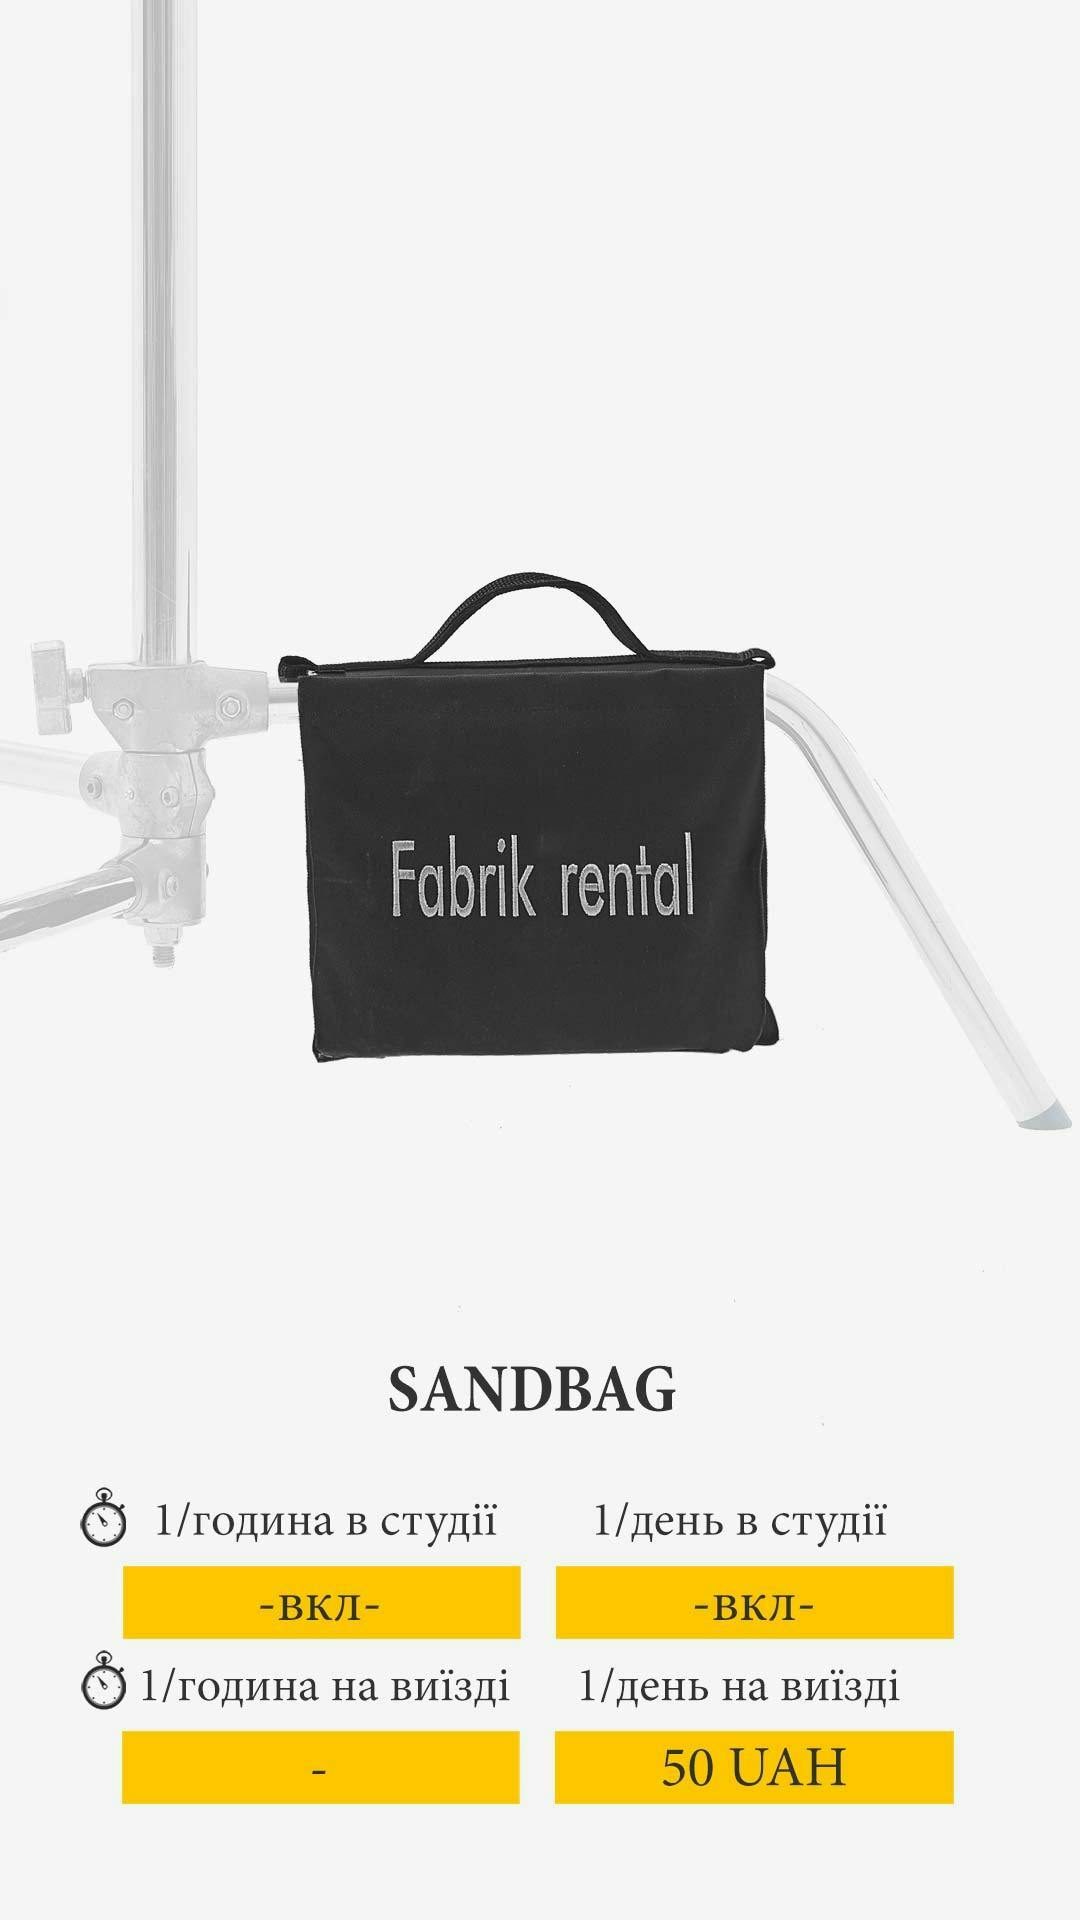 Cover image from sandbag